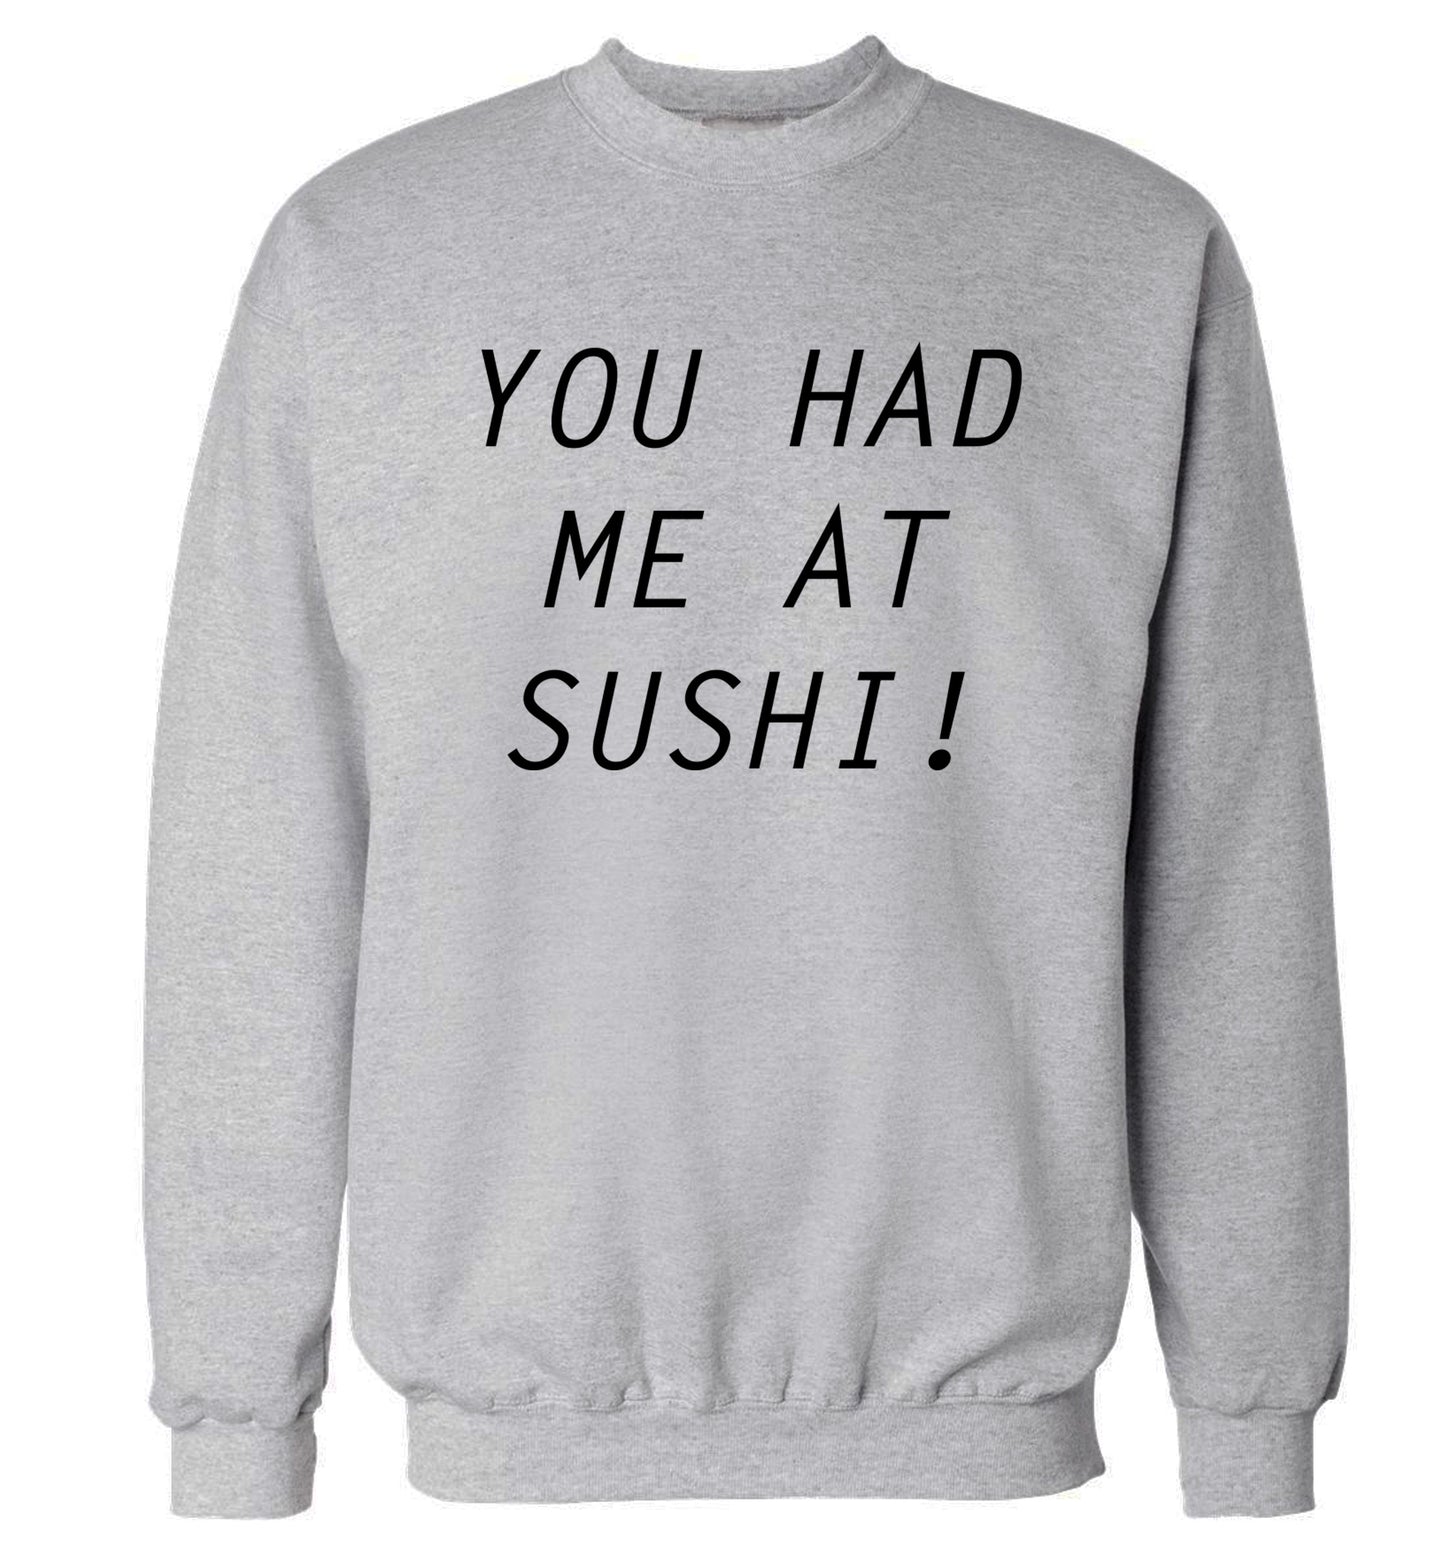 You had me at sushi Adult's unisex grey Sweater 2XL